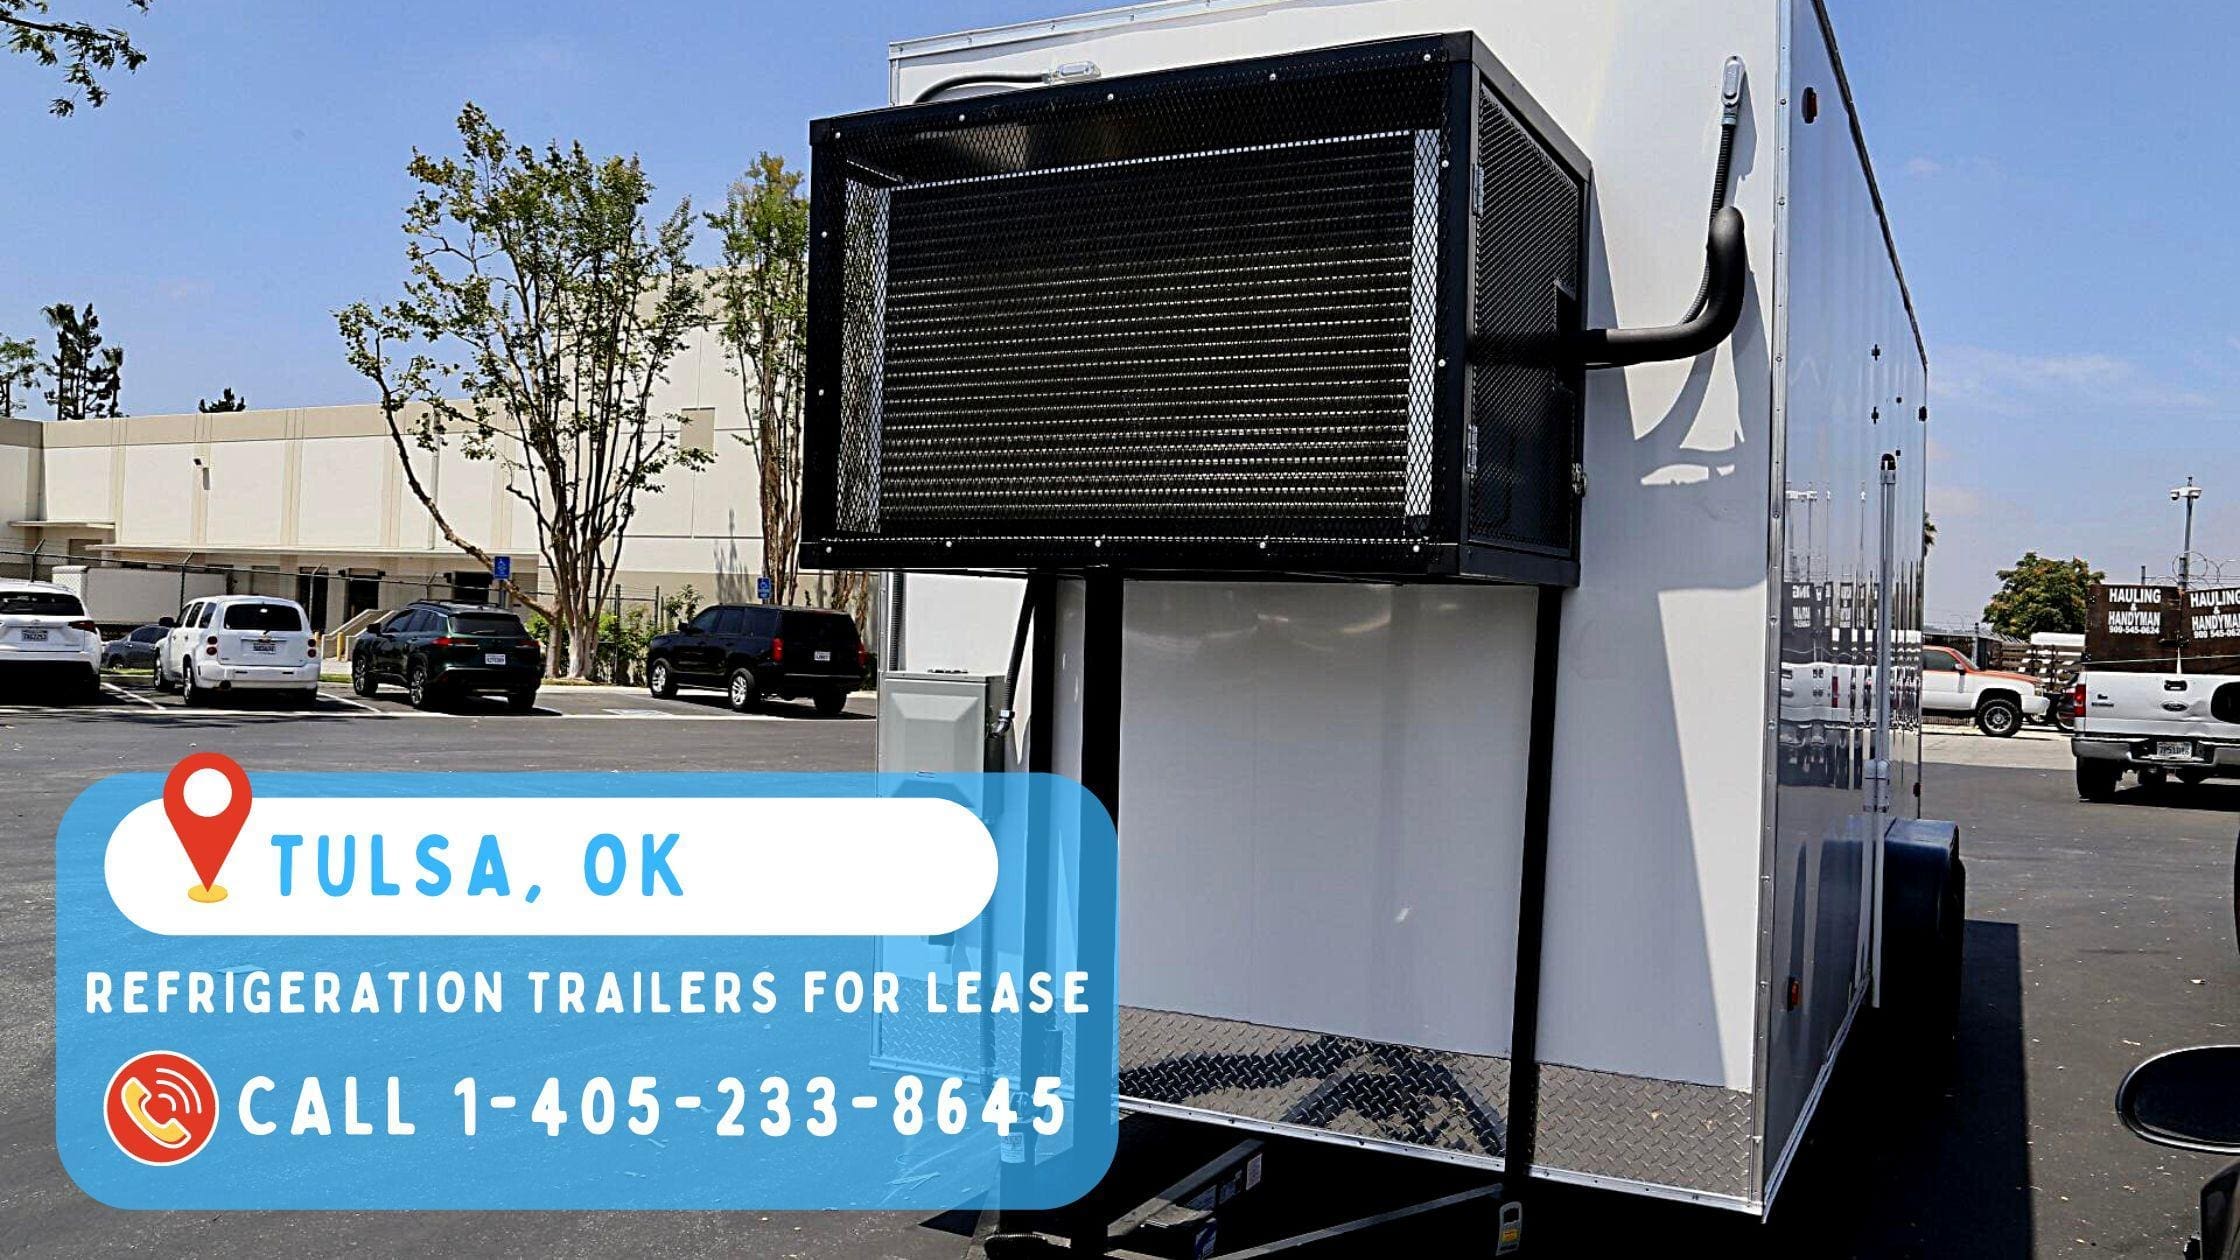 Refrigeration Trailers for Lease in Tulsa, OK